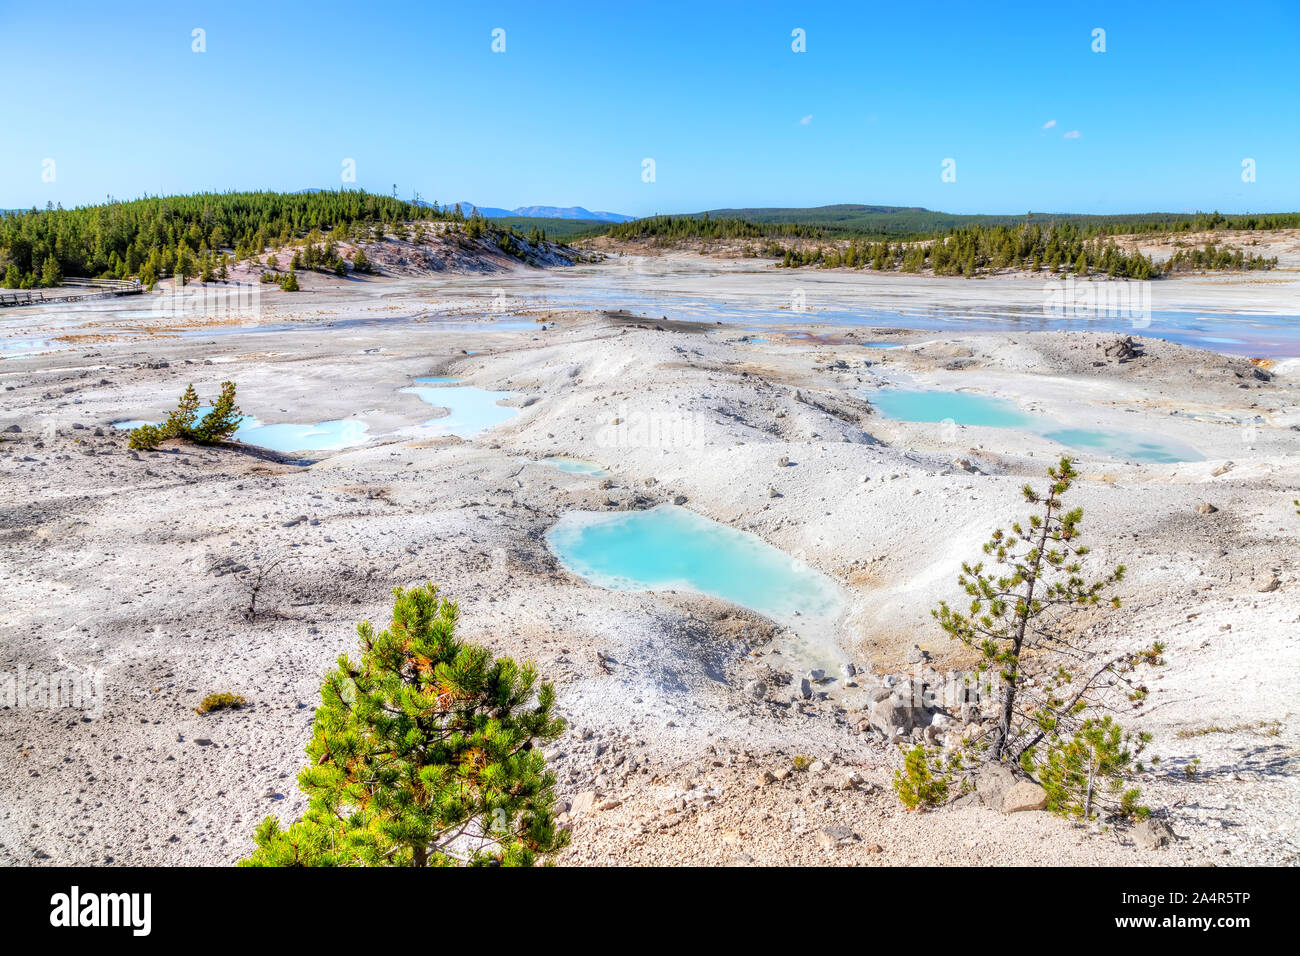 Geothermal pools at Porcelain Basin Trail inside Norris Geyser Basin of Yellowstone National Park, Wyoming, USA. Stock Photo